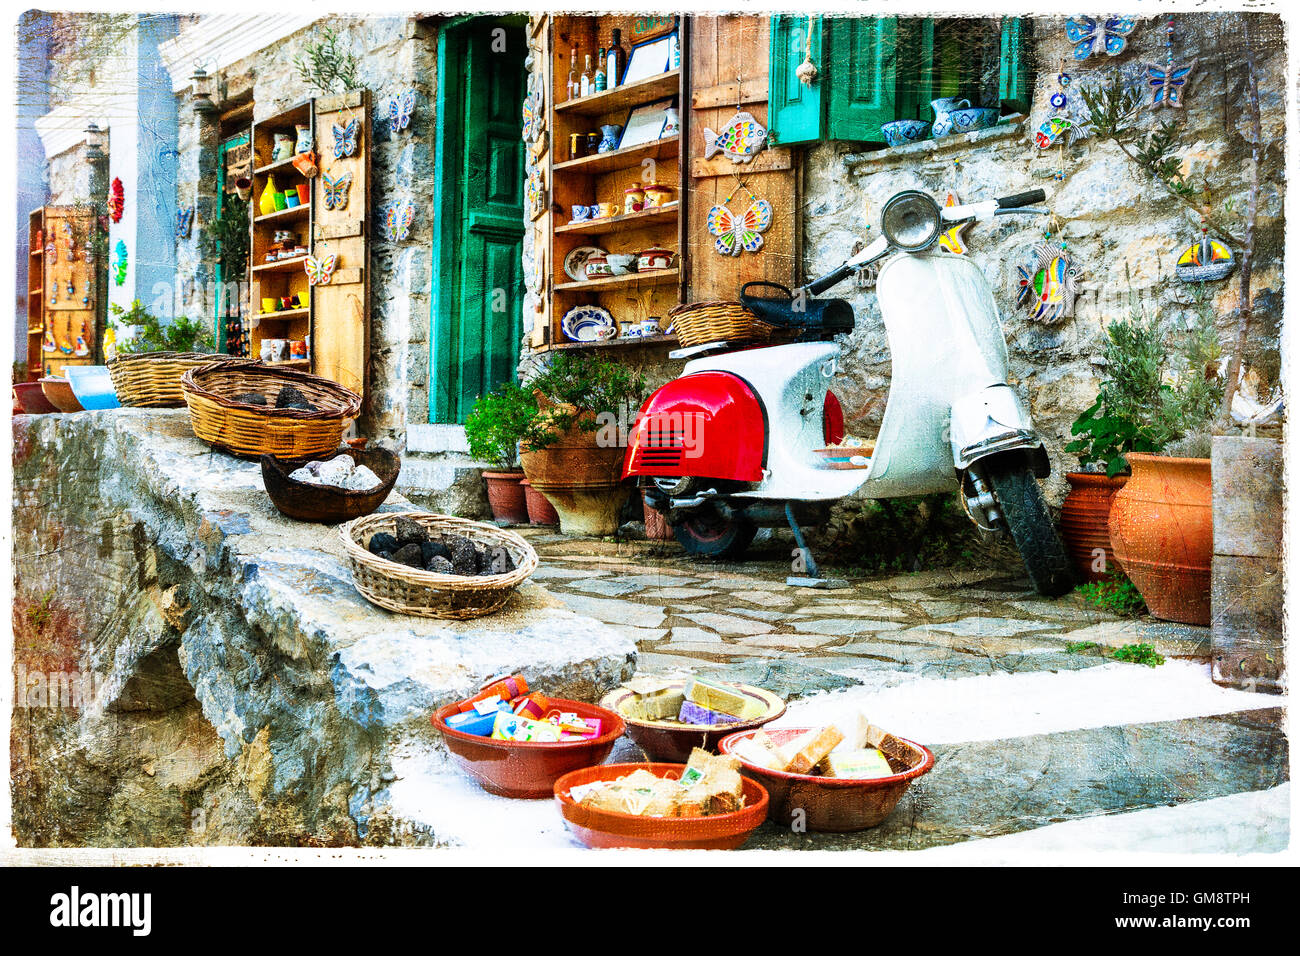 small charming shop with motorbike in Karpathos island, Greece. artistic picture Stock Photo